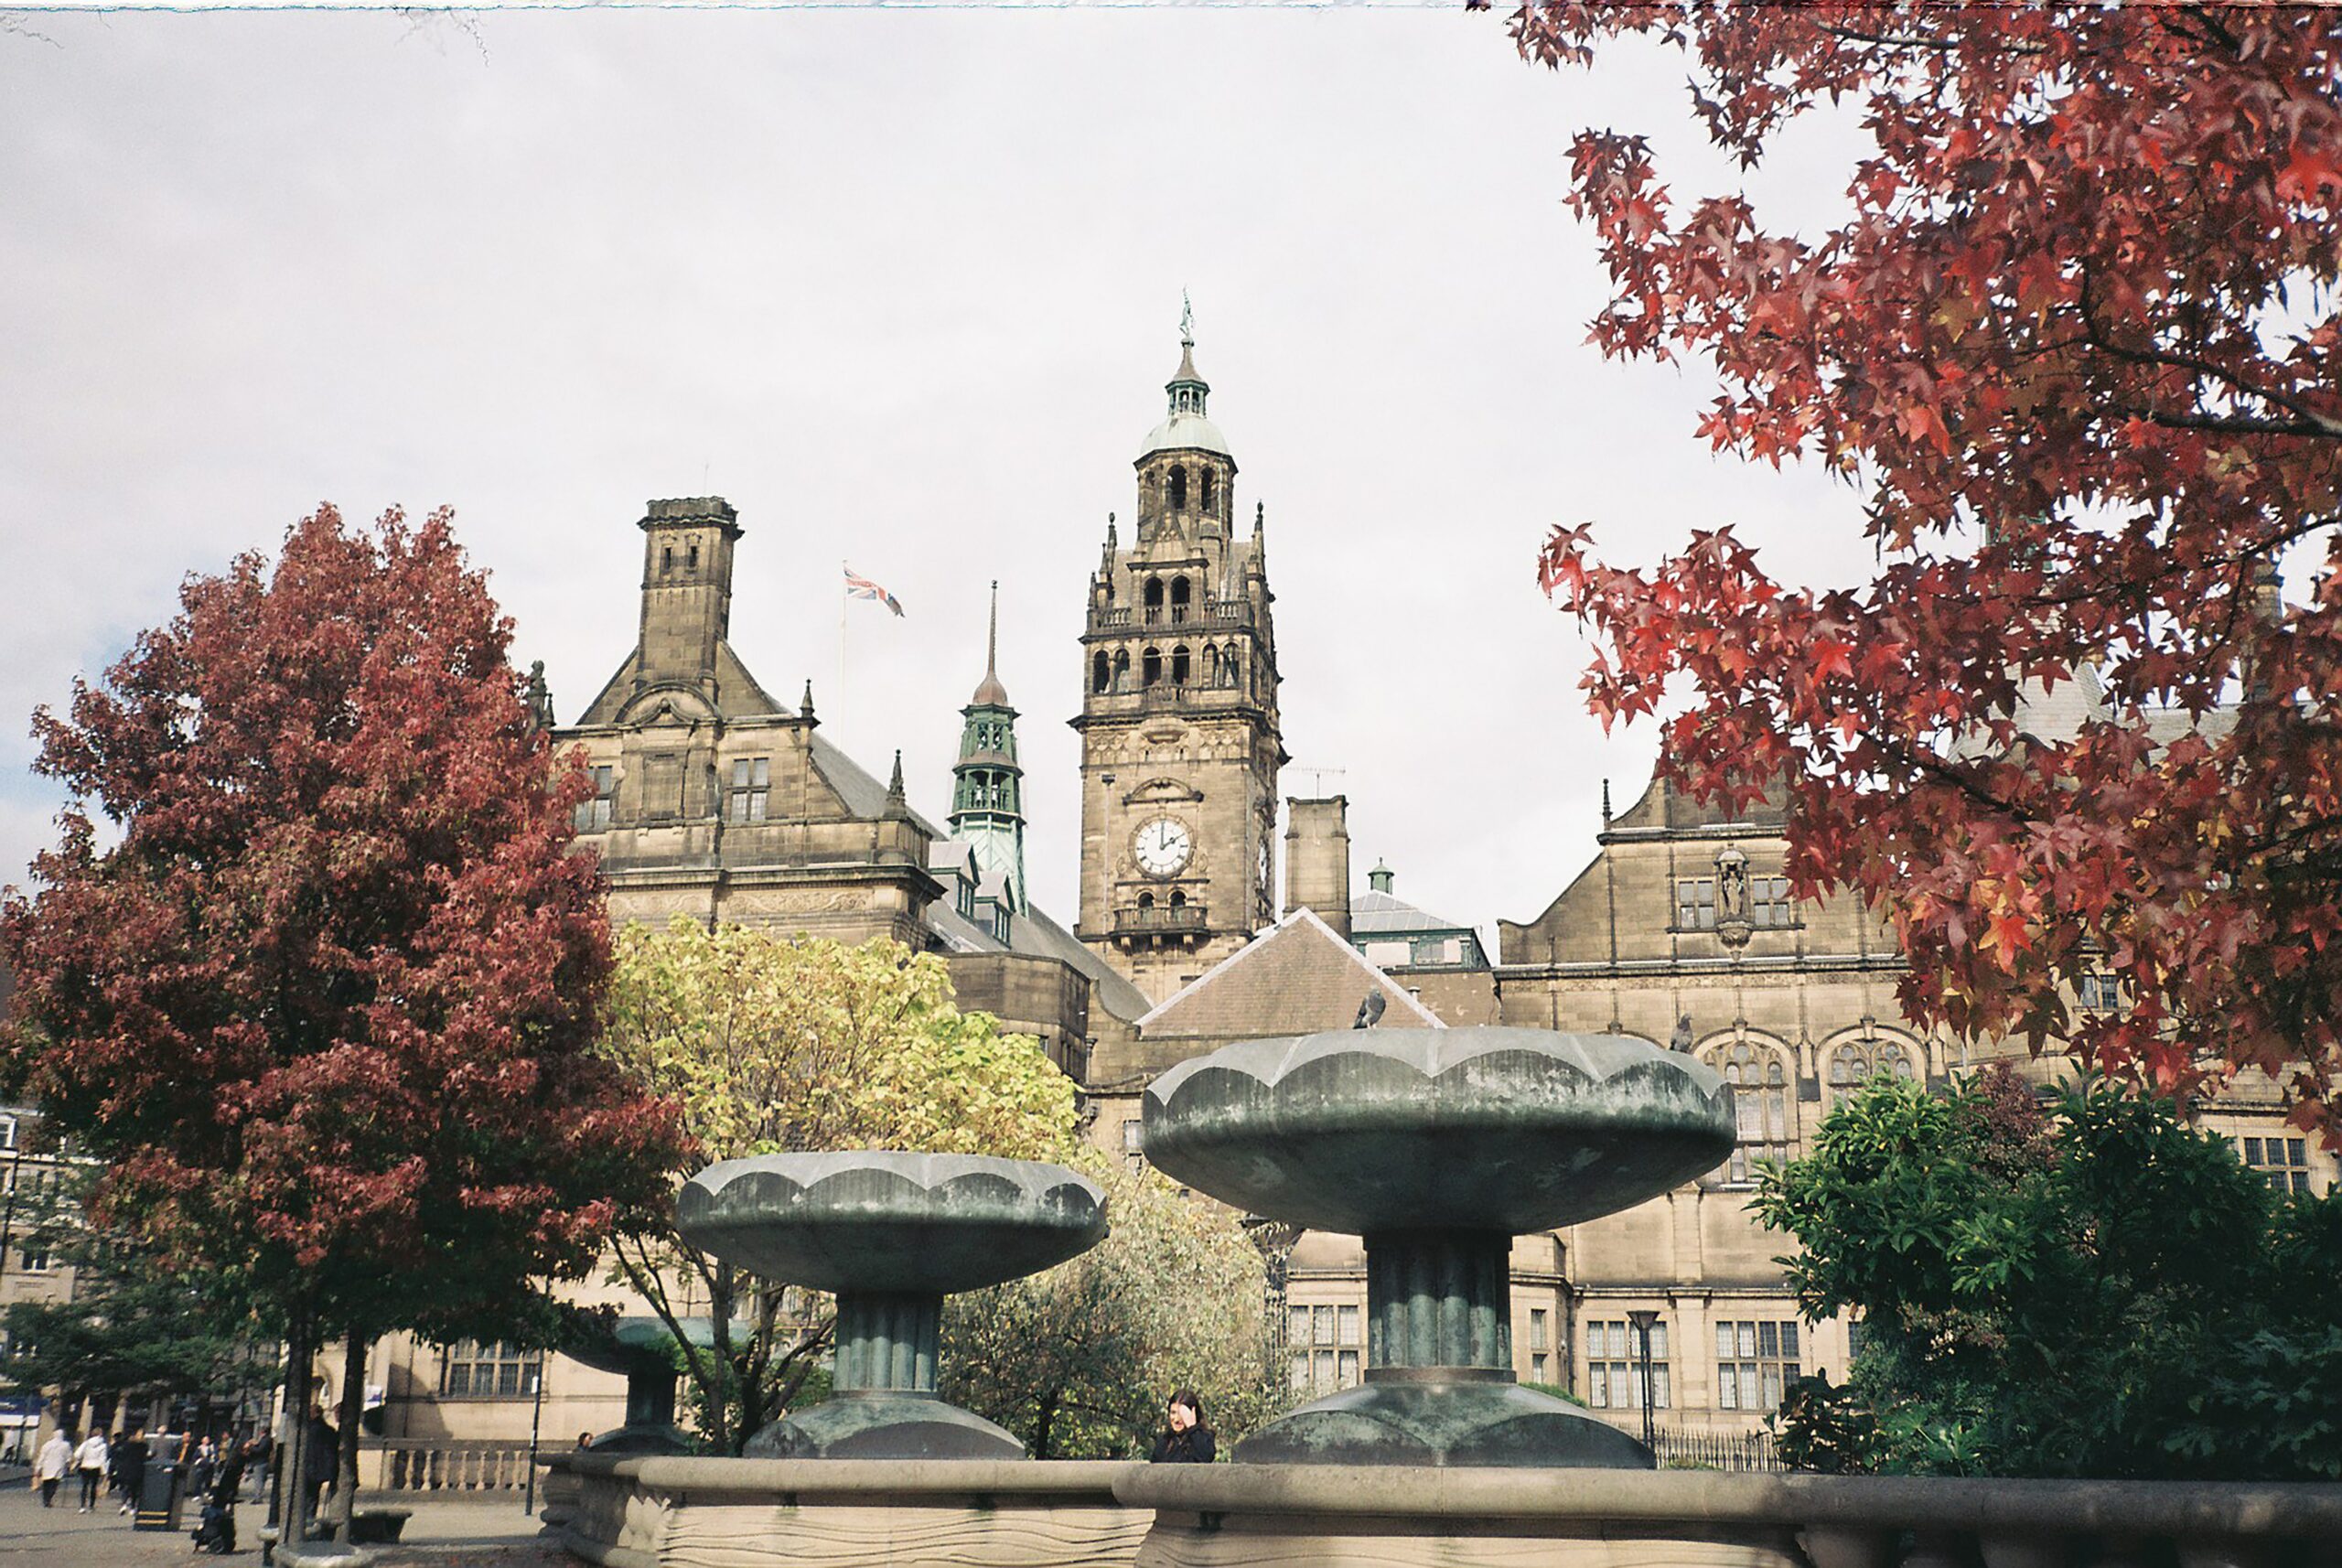 Clock tower and fountain located in Sheffield with red trees surrounding.